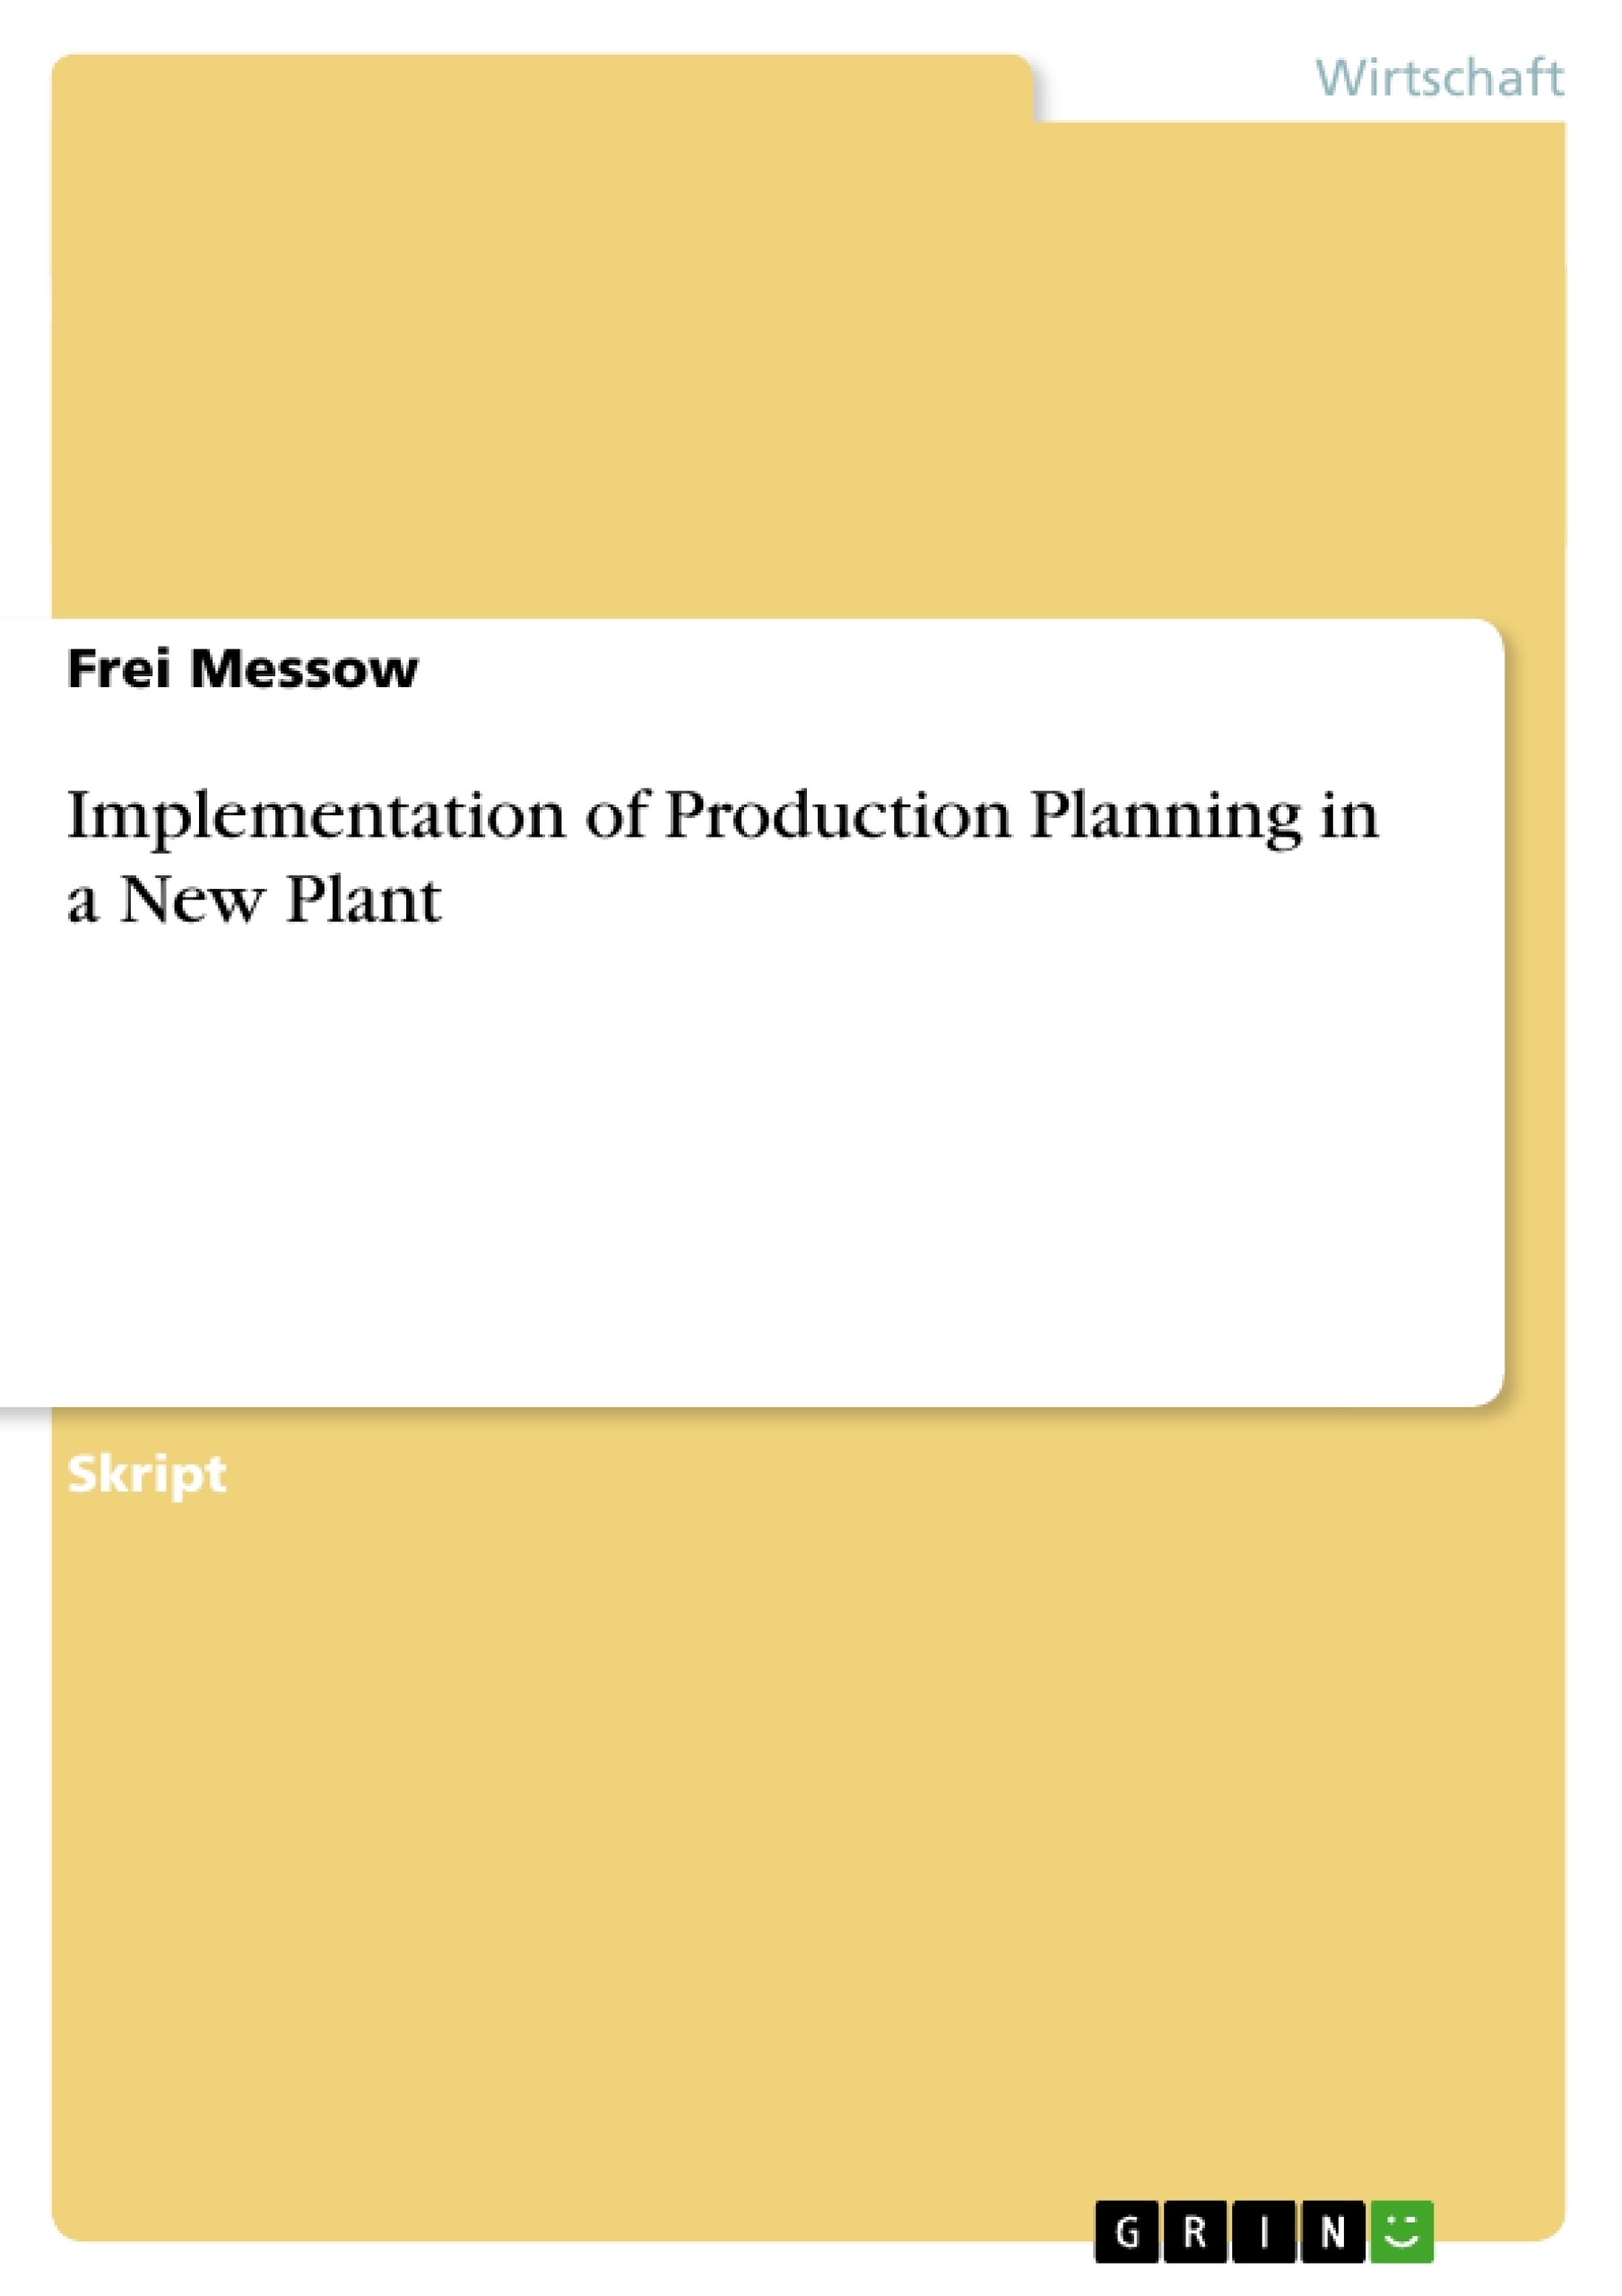 Title: Implementation of Production Planning in a New Plant